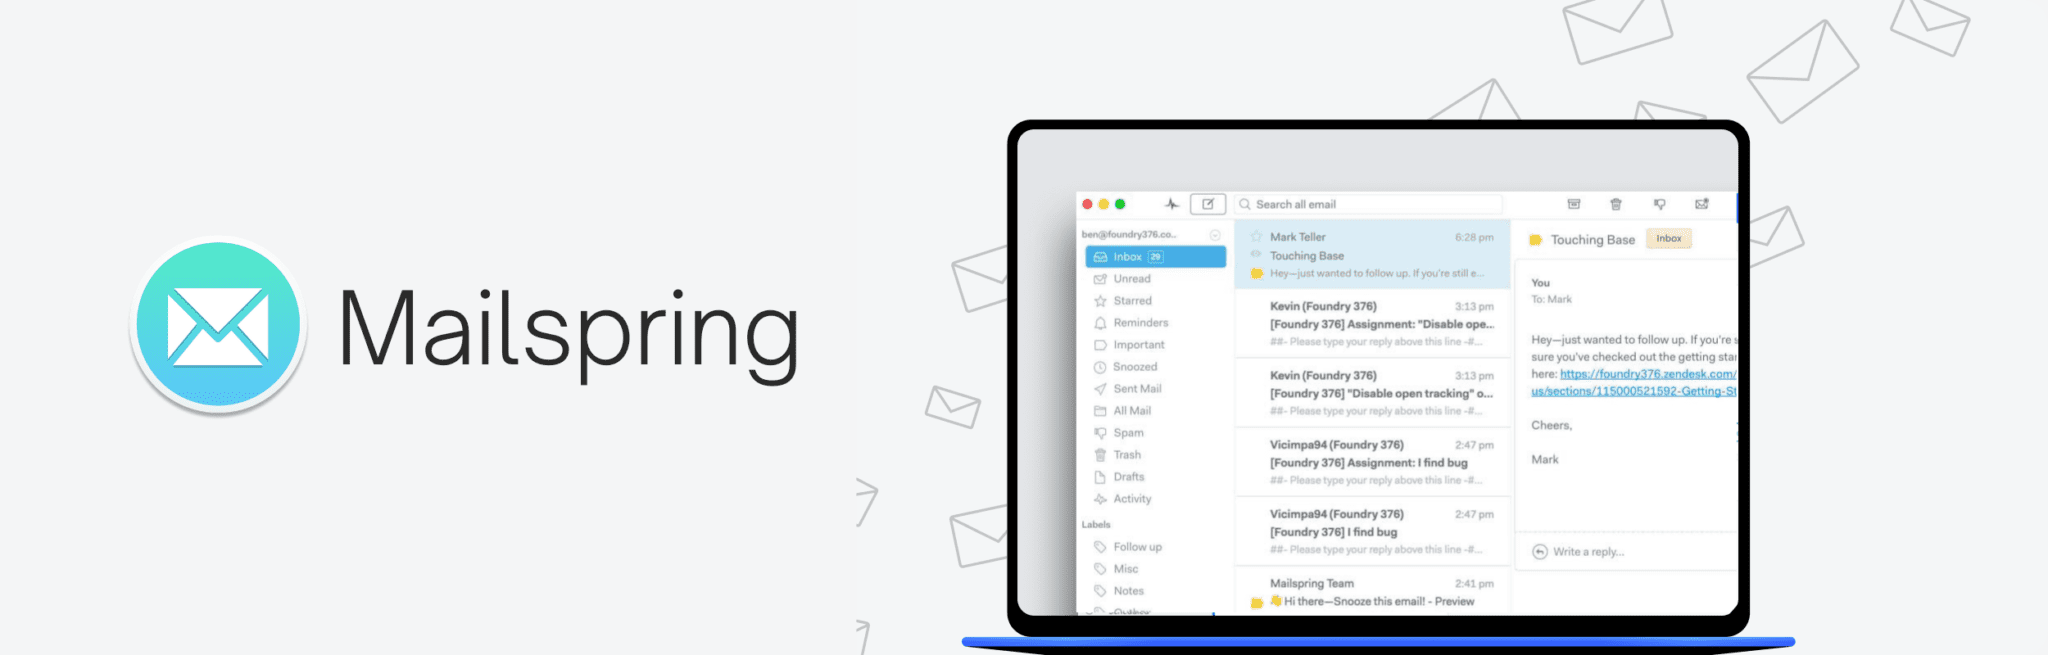 download email app for windows